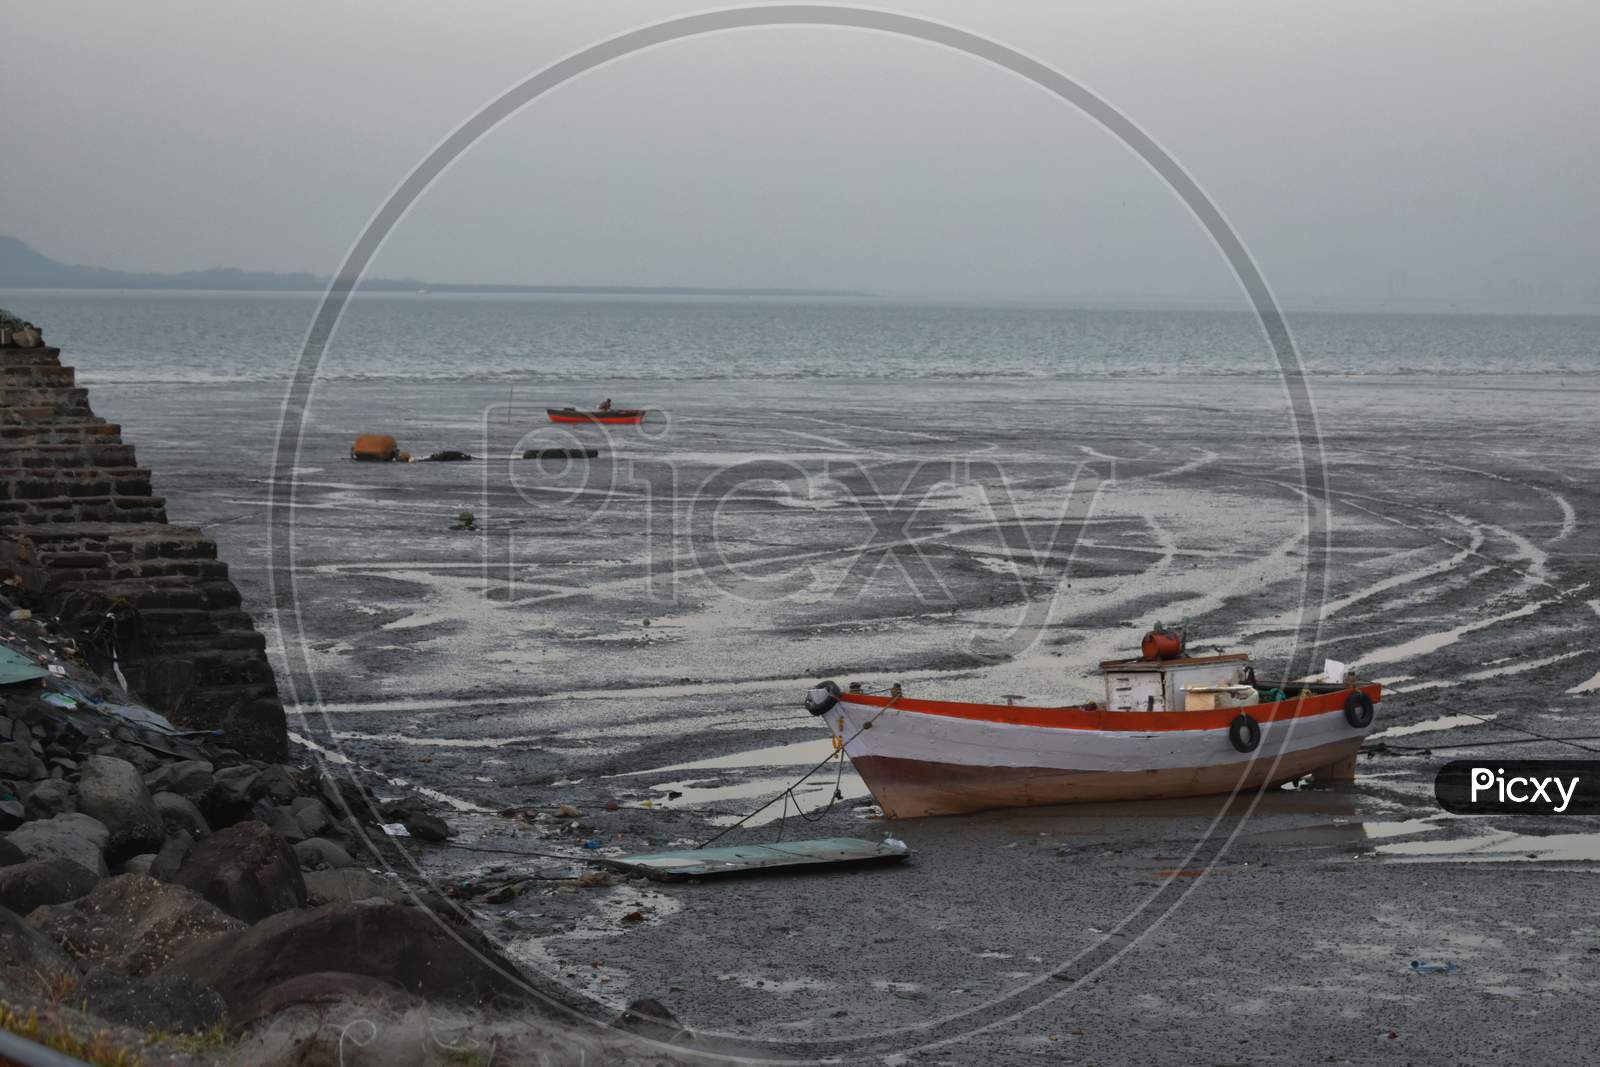 A Fishing Boat Standing During The Low Tide Near A Ocean.